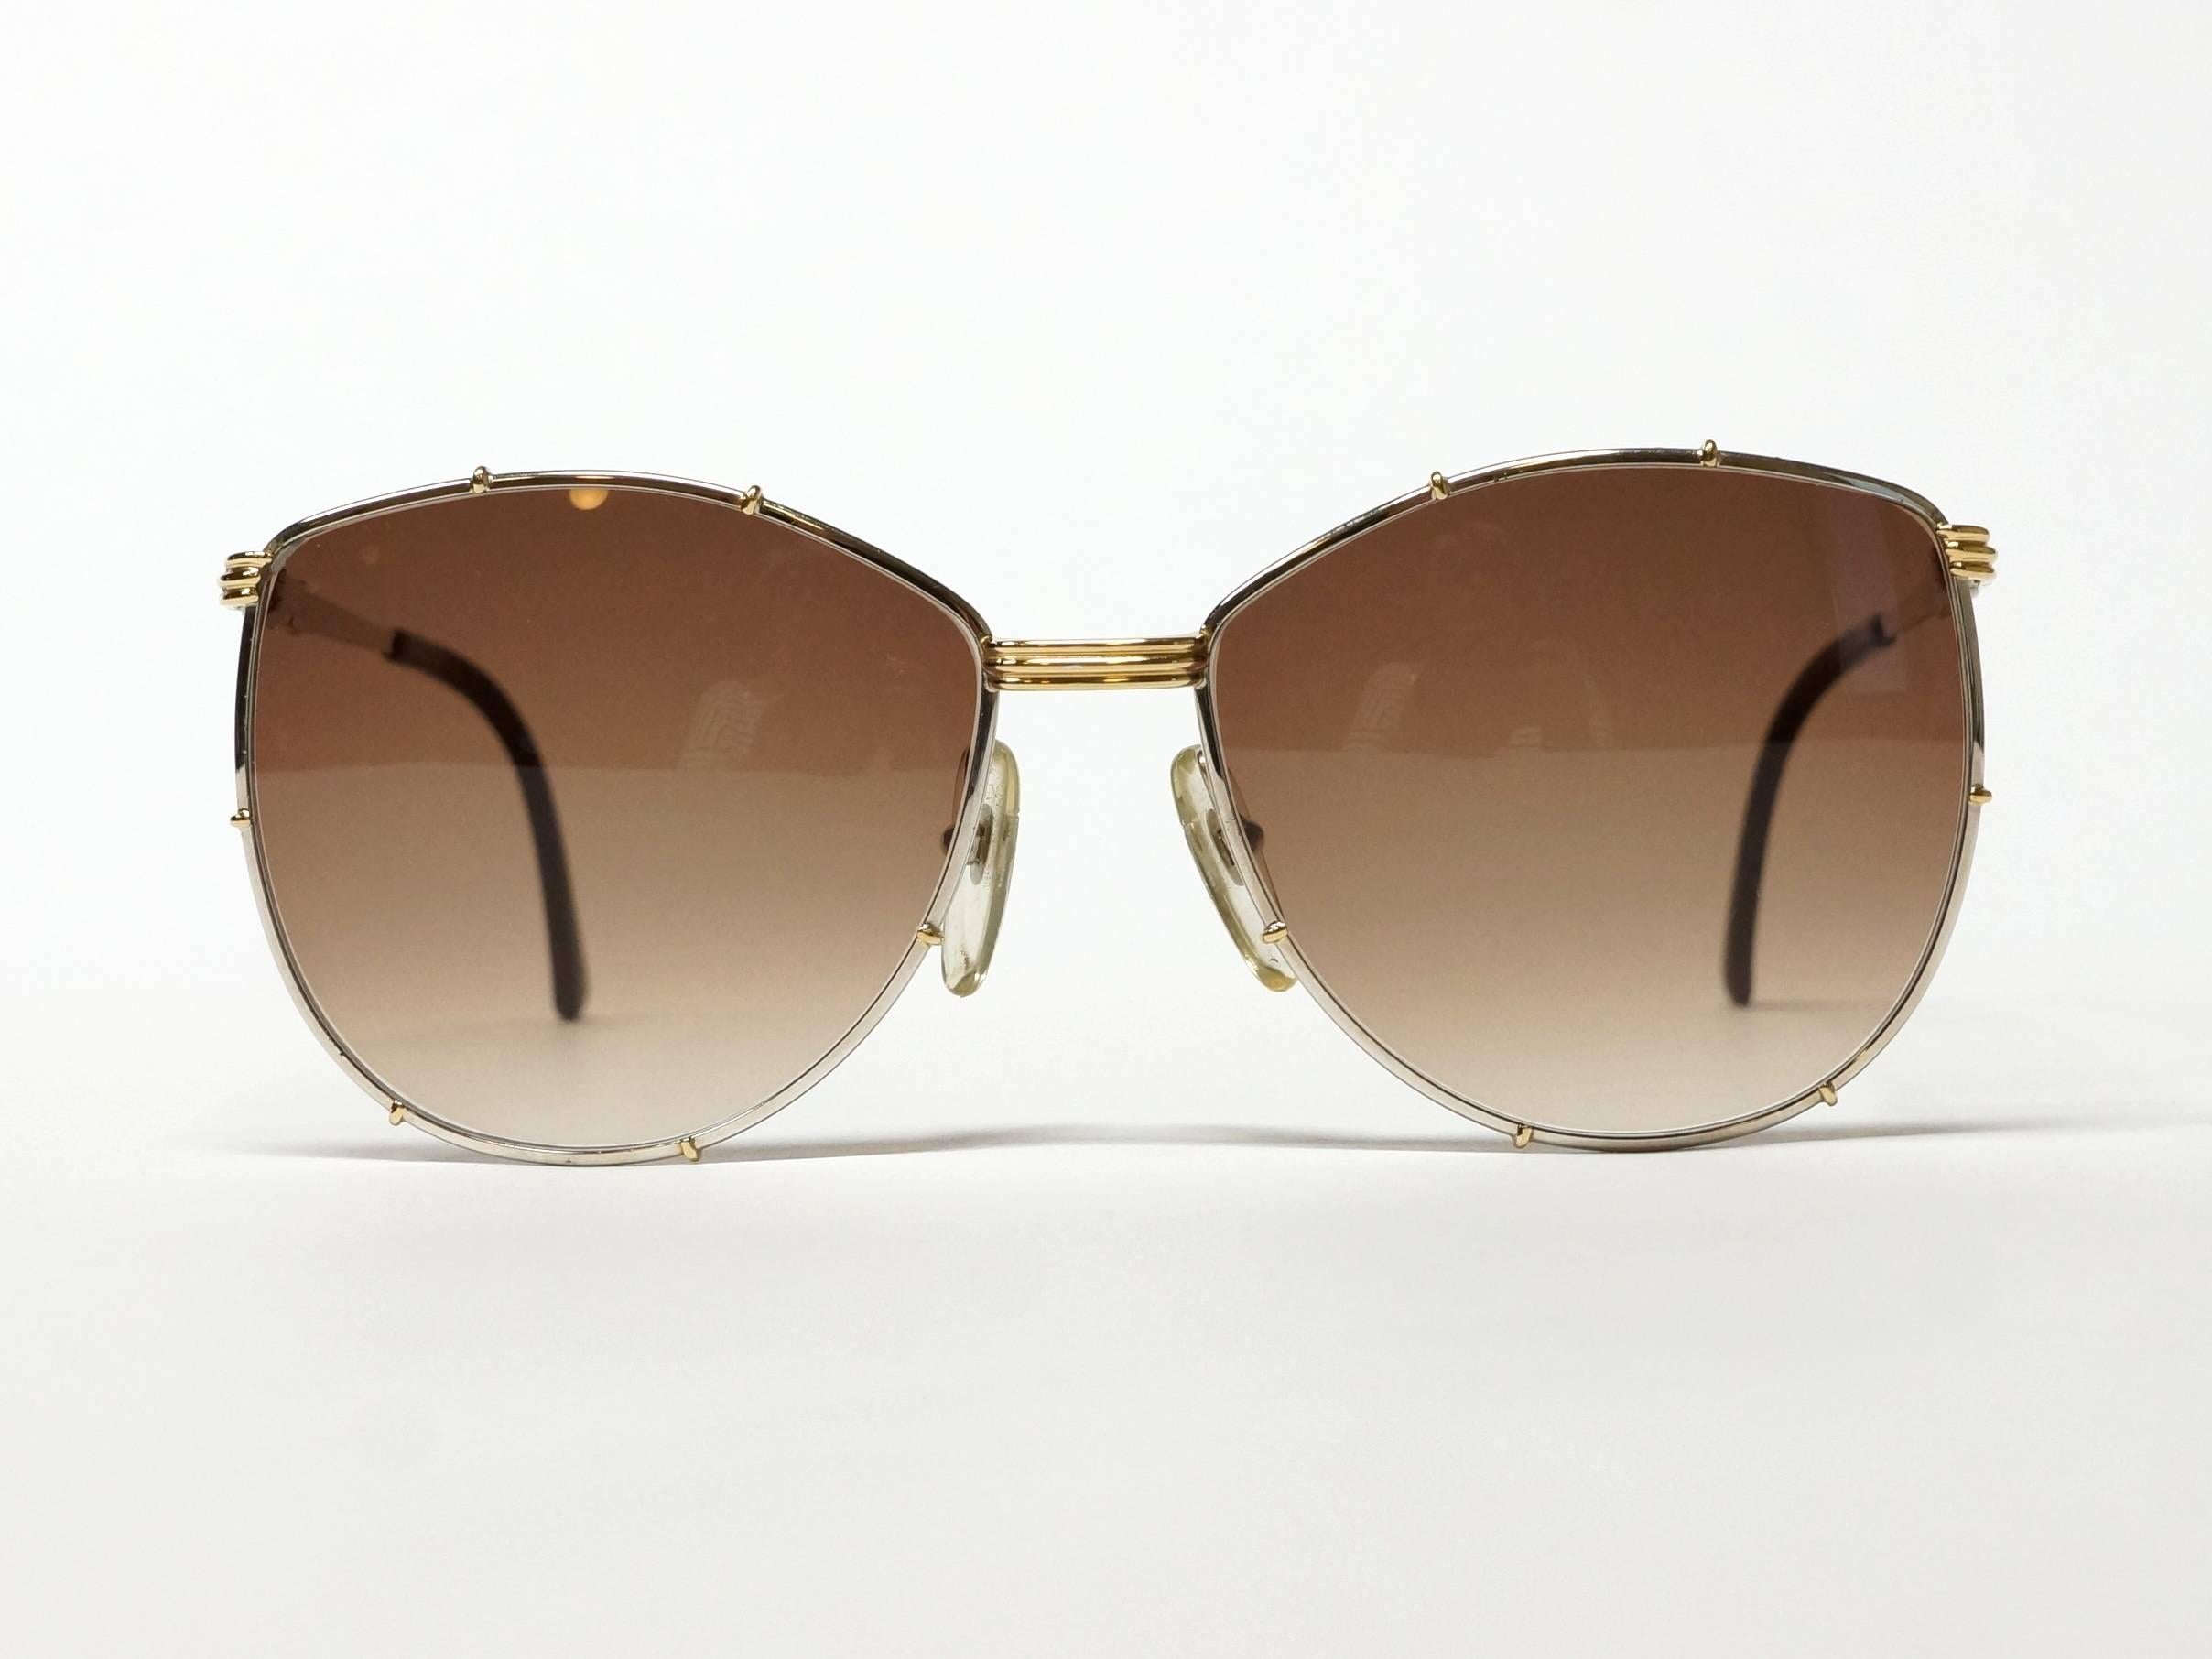 Classic 80s vintage bicolor - gold/silver - sunglasses by Christian Dior made in Austria. High quality metal frame in new old stock condition. 

Model: 2249
color: 47
size: 59◻16 - 135

approximate dimensions:
temple length: 130mm - 5